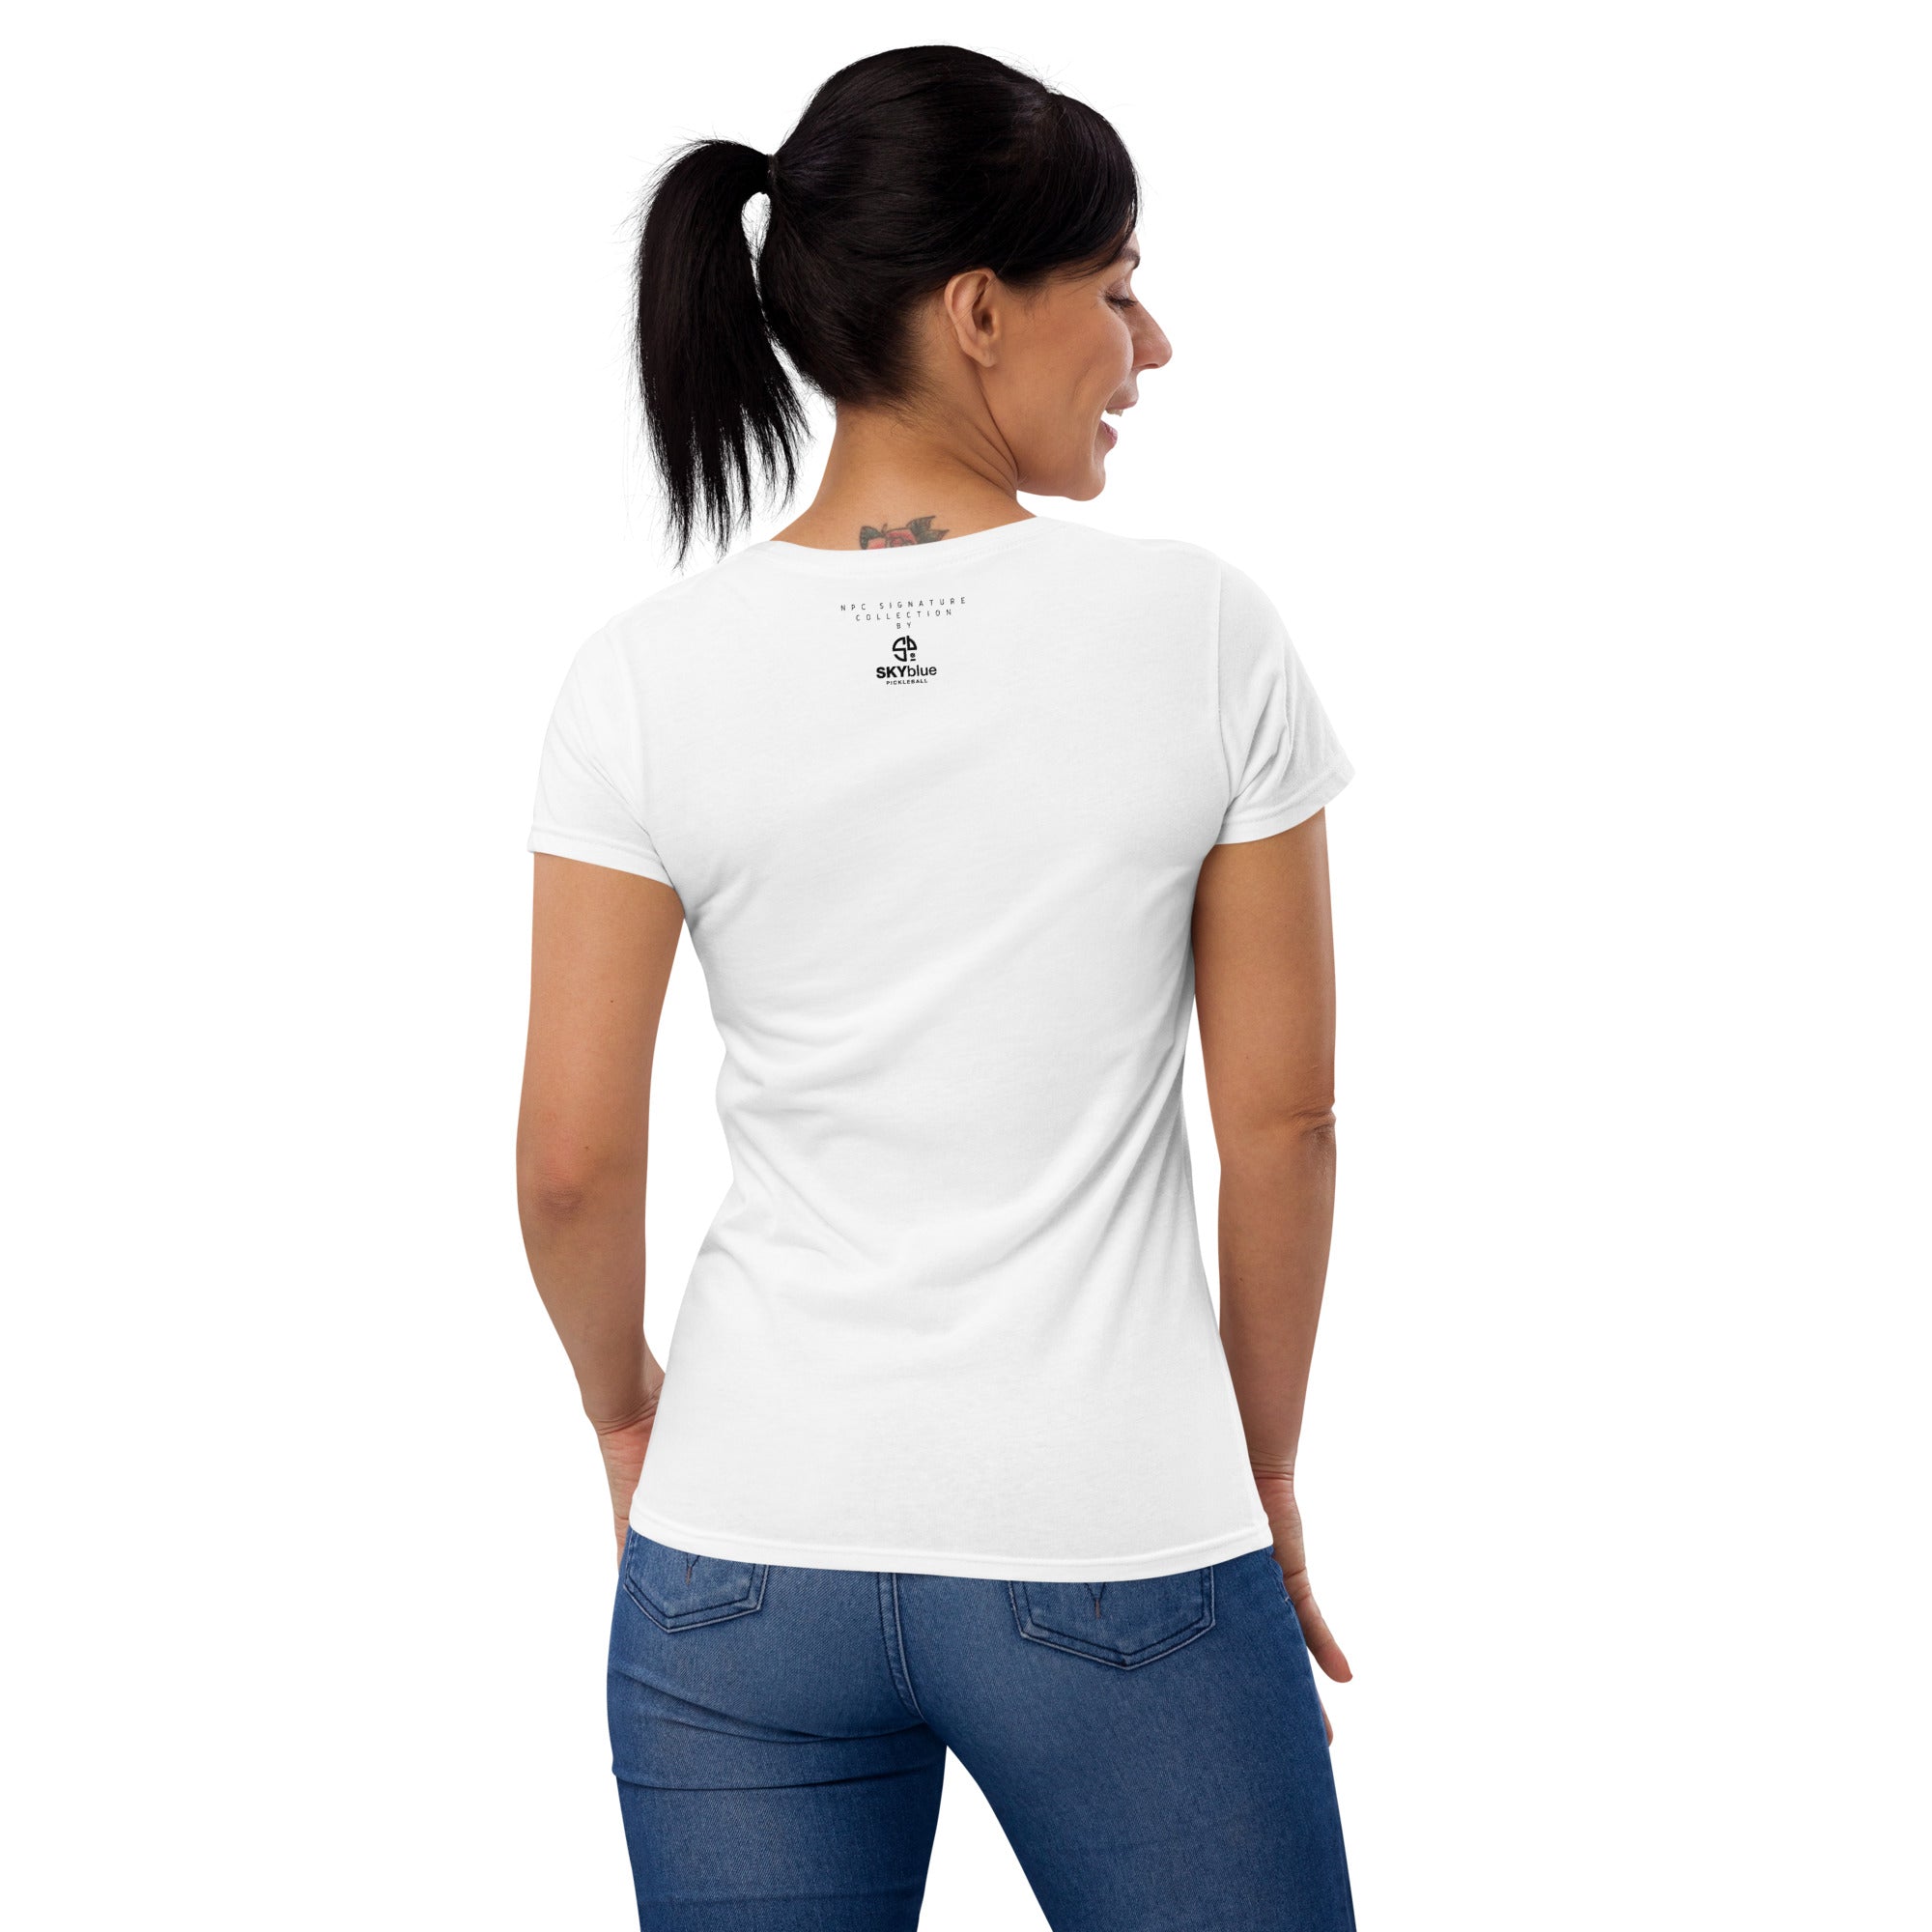 NPC Signature Collection "The United Nations of Pickleball Women™!" Women's short sleeve cotton t-shirt